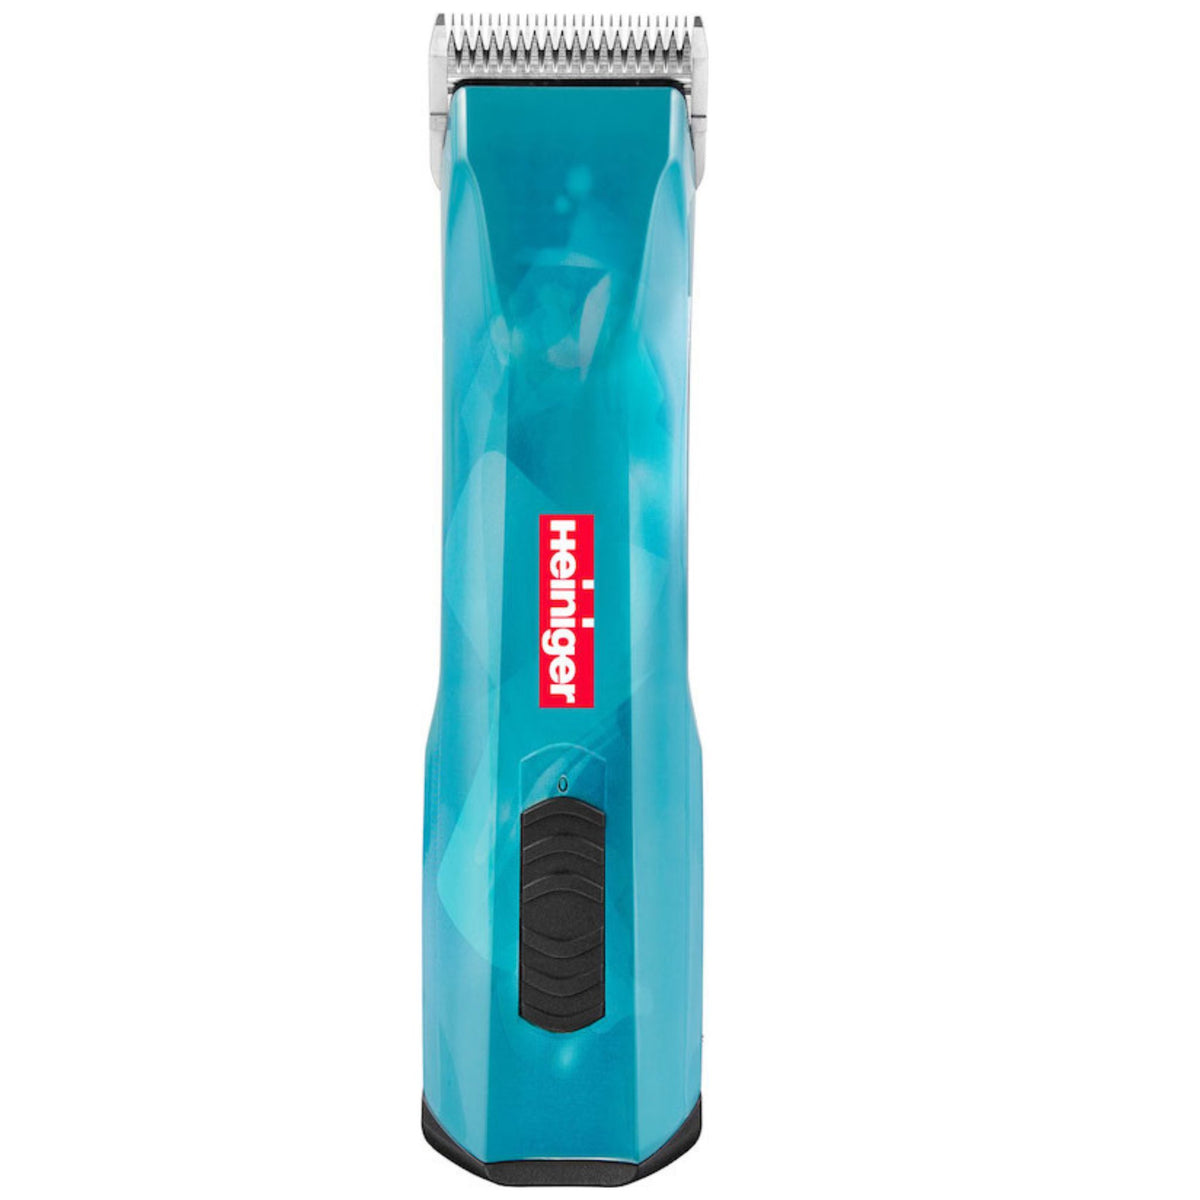 Vertical blue clippers with slight geometric pattern, silver blade and black details.